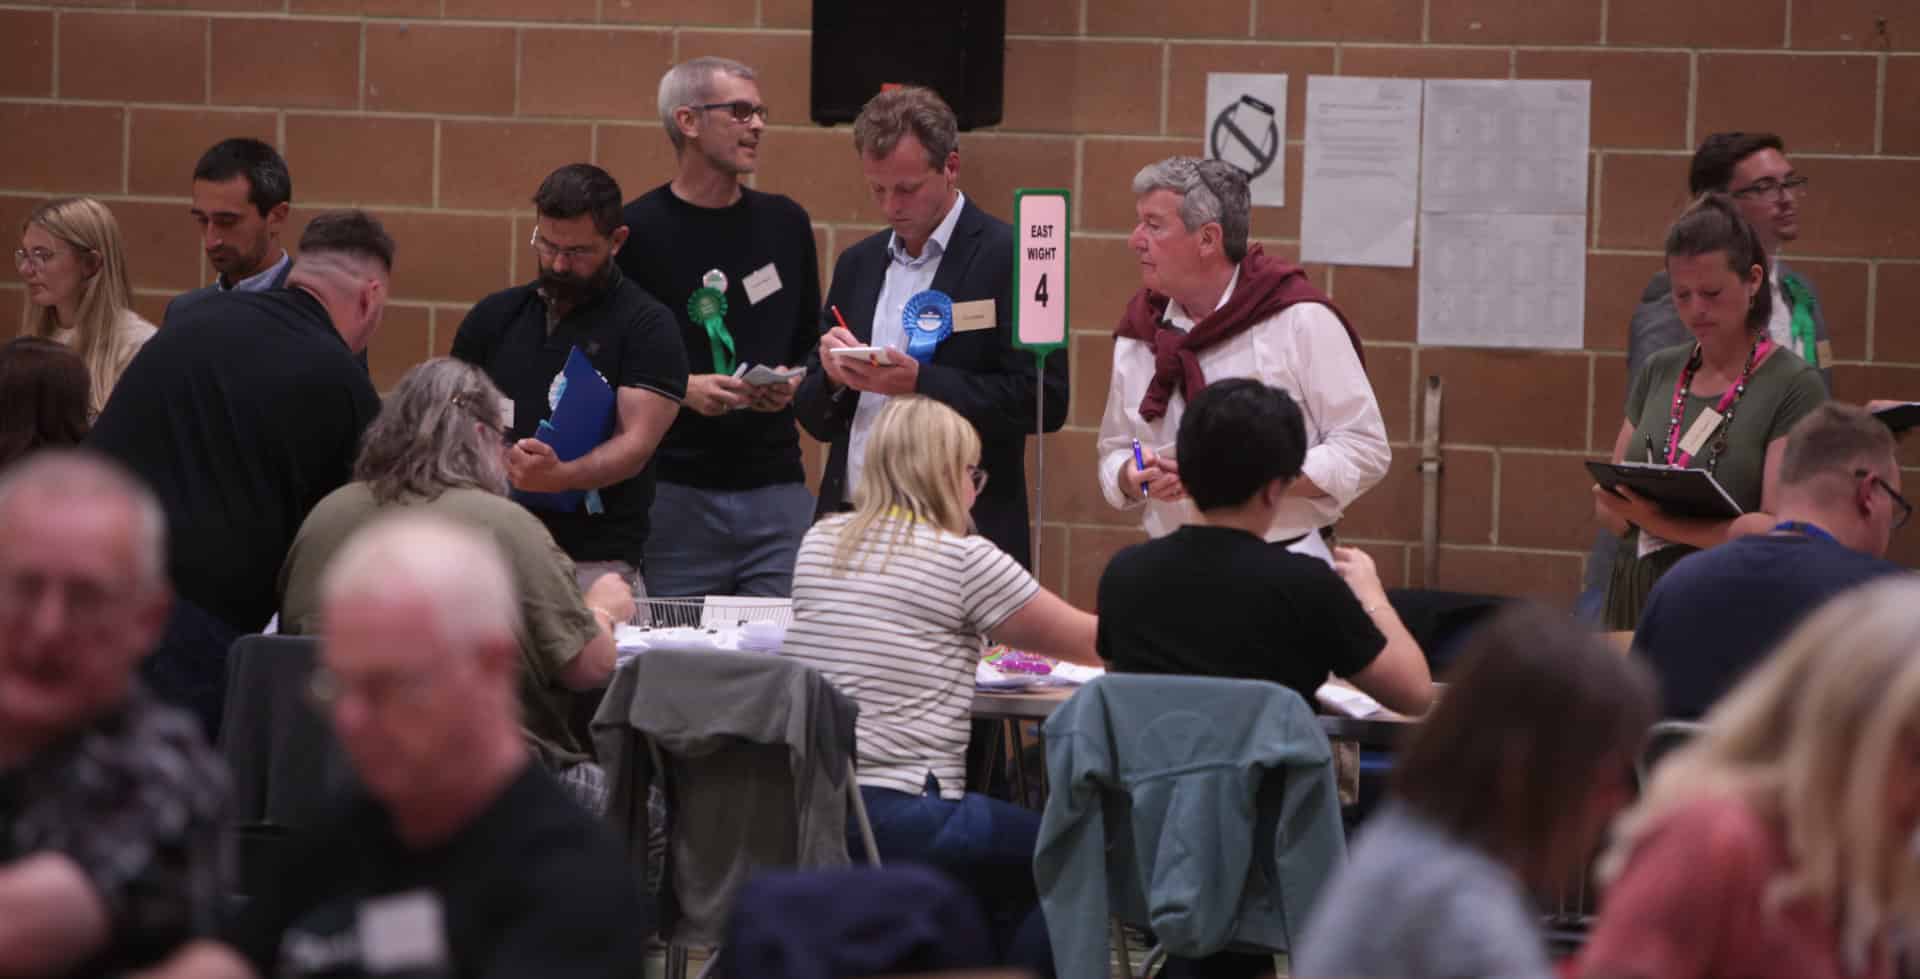 election count - with joe robertson, charity garnett, steohen cockett and reform supporters